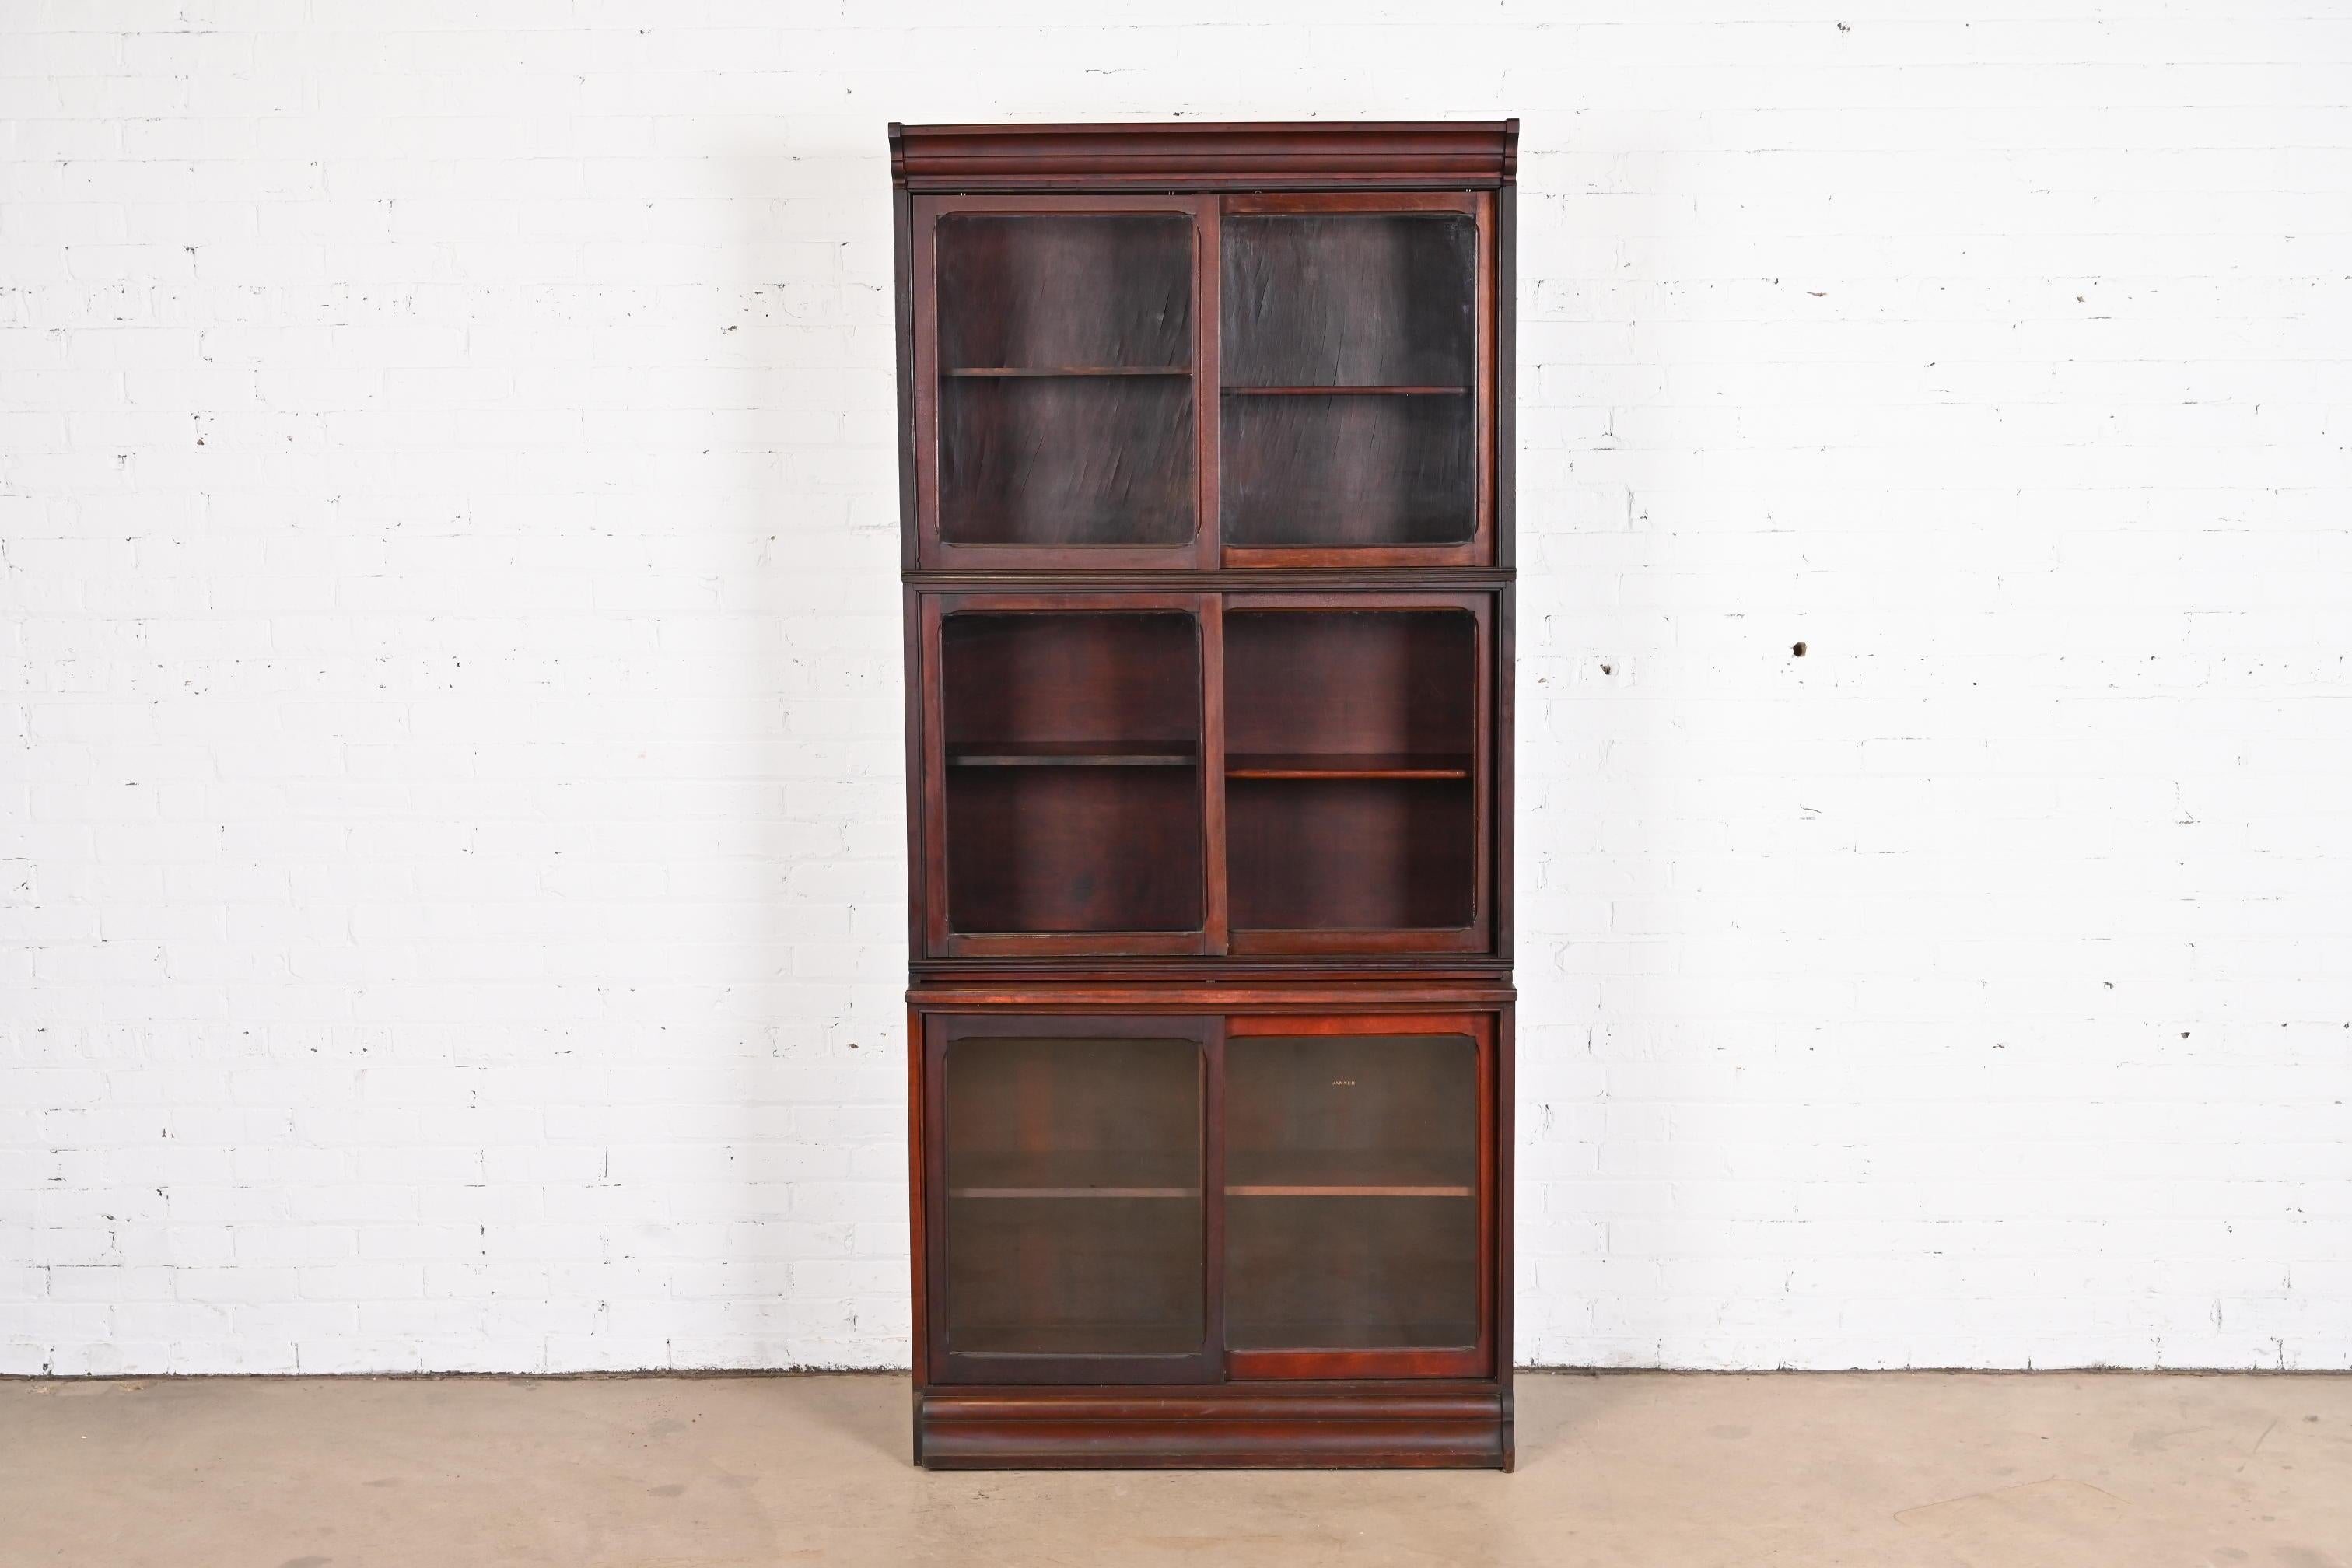 A gorgeous antique Arts & Crafts stacking barrister bookcase with sliding glass doors

In the manner of Globe Wernicke

By Danner

USA, Circa 1920s

Mahogany, with glass front doors.

Measures: 37